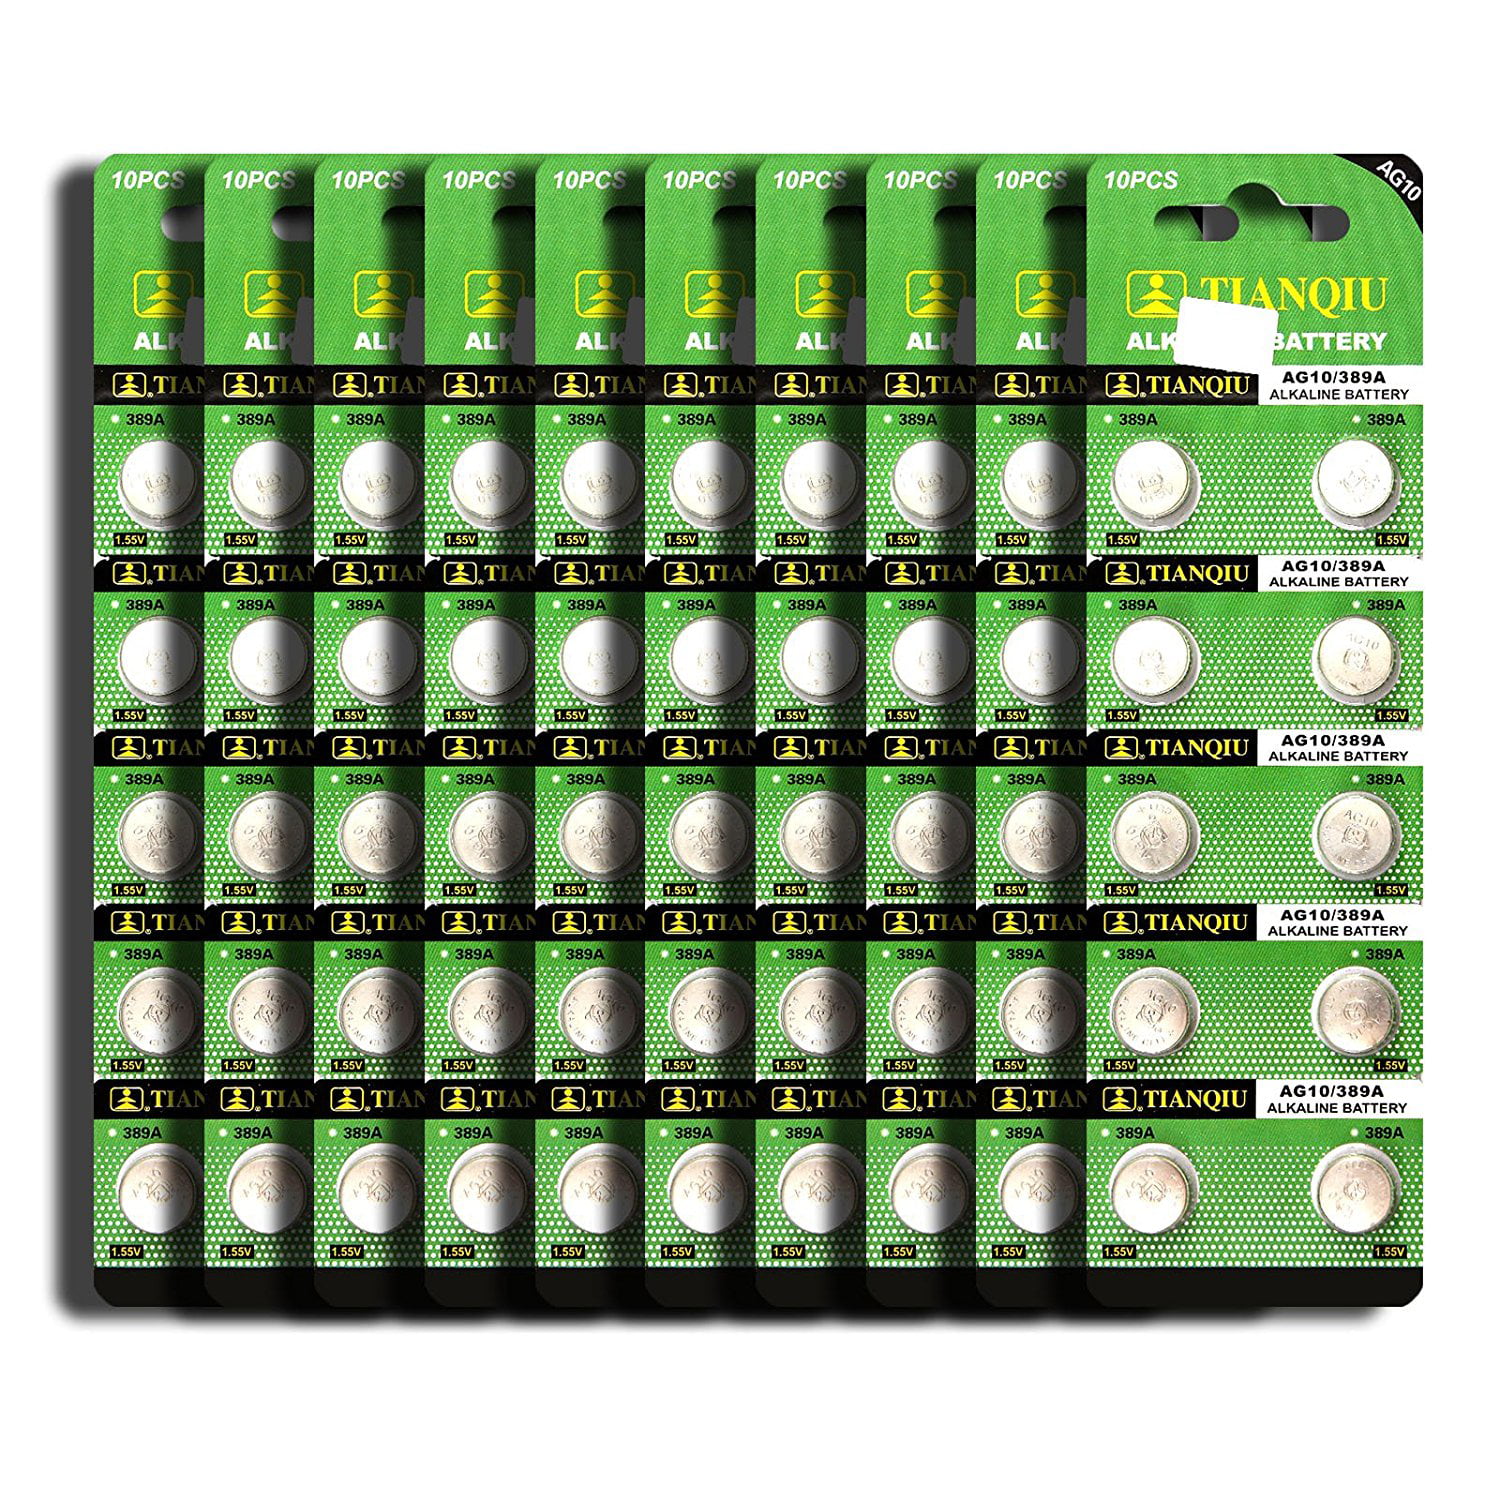 10 Pieces AG10 LR1130 389A LR54 SR1130 L1131 Alkaline Button Cell Battery with Retail Blister Pack Cards